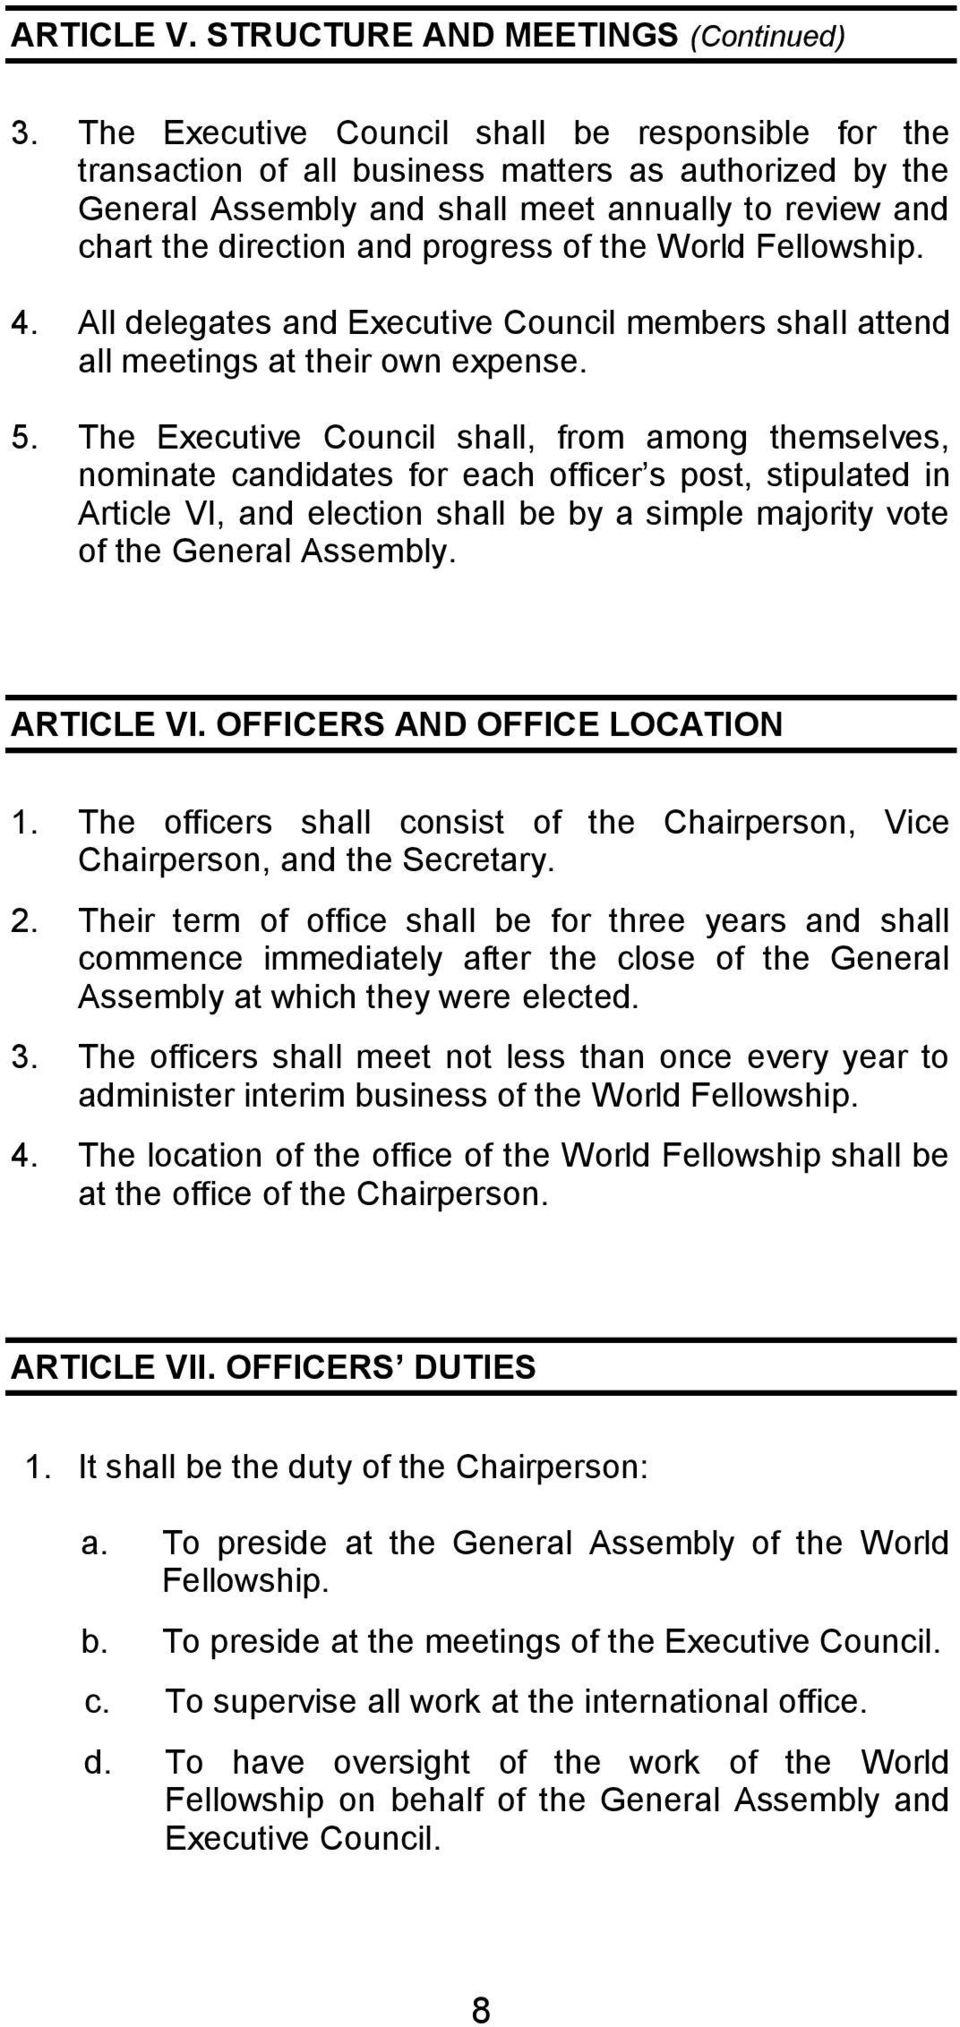 the World Fellowship. 4. All delegates and Executive Council members shall attend all meetings at their own expense. 5.